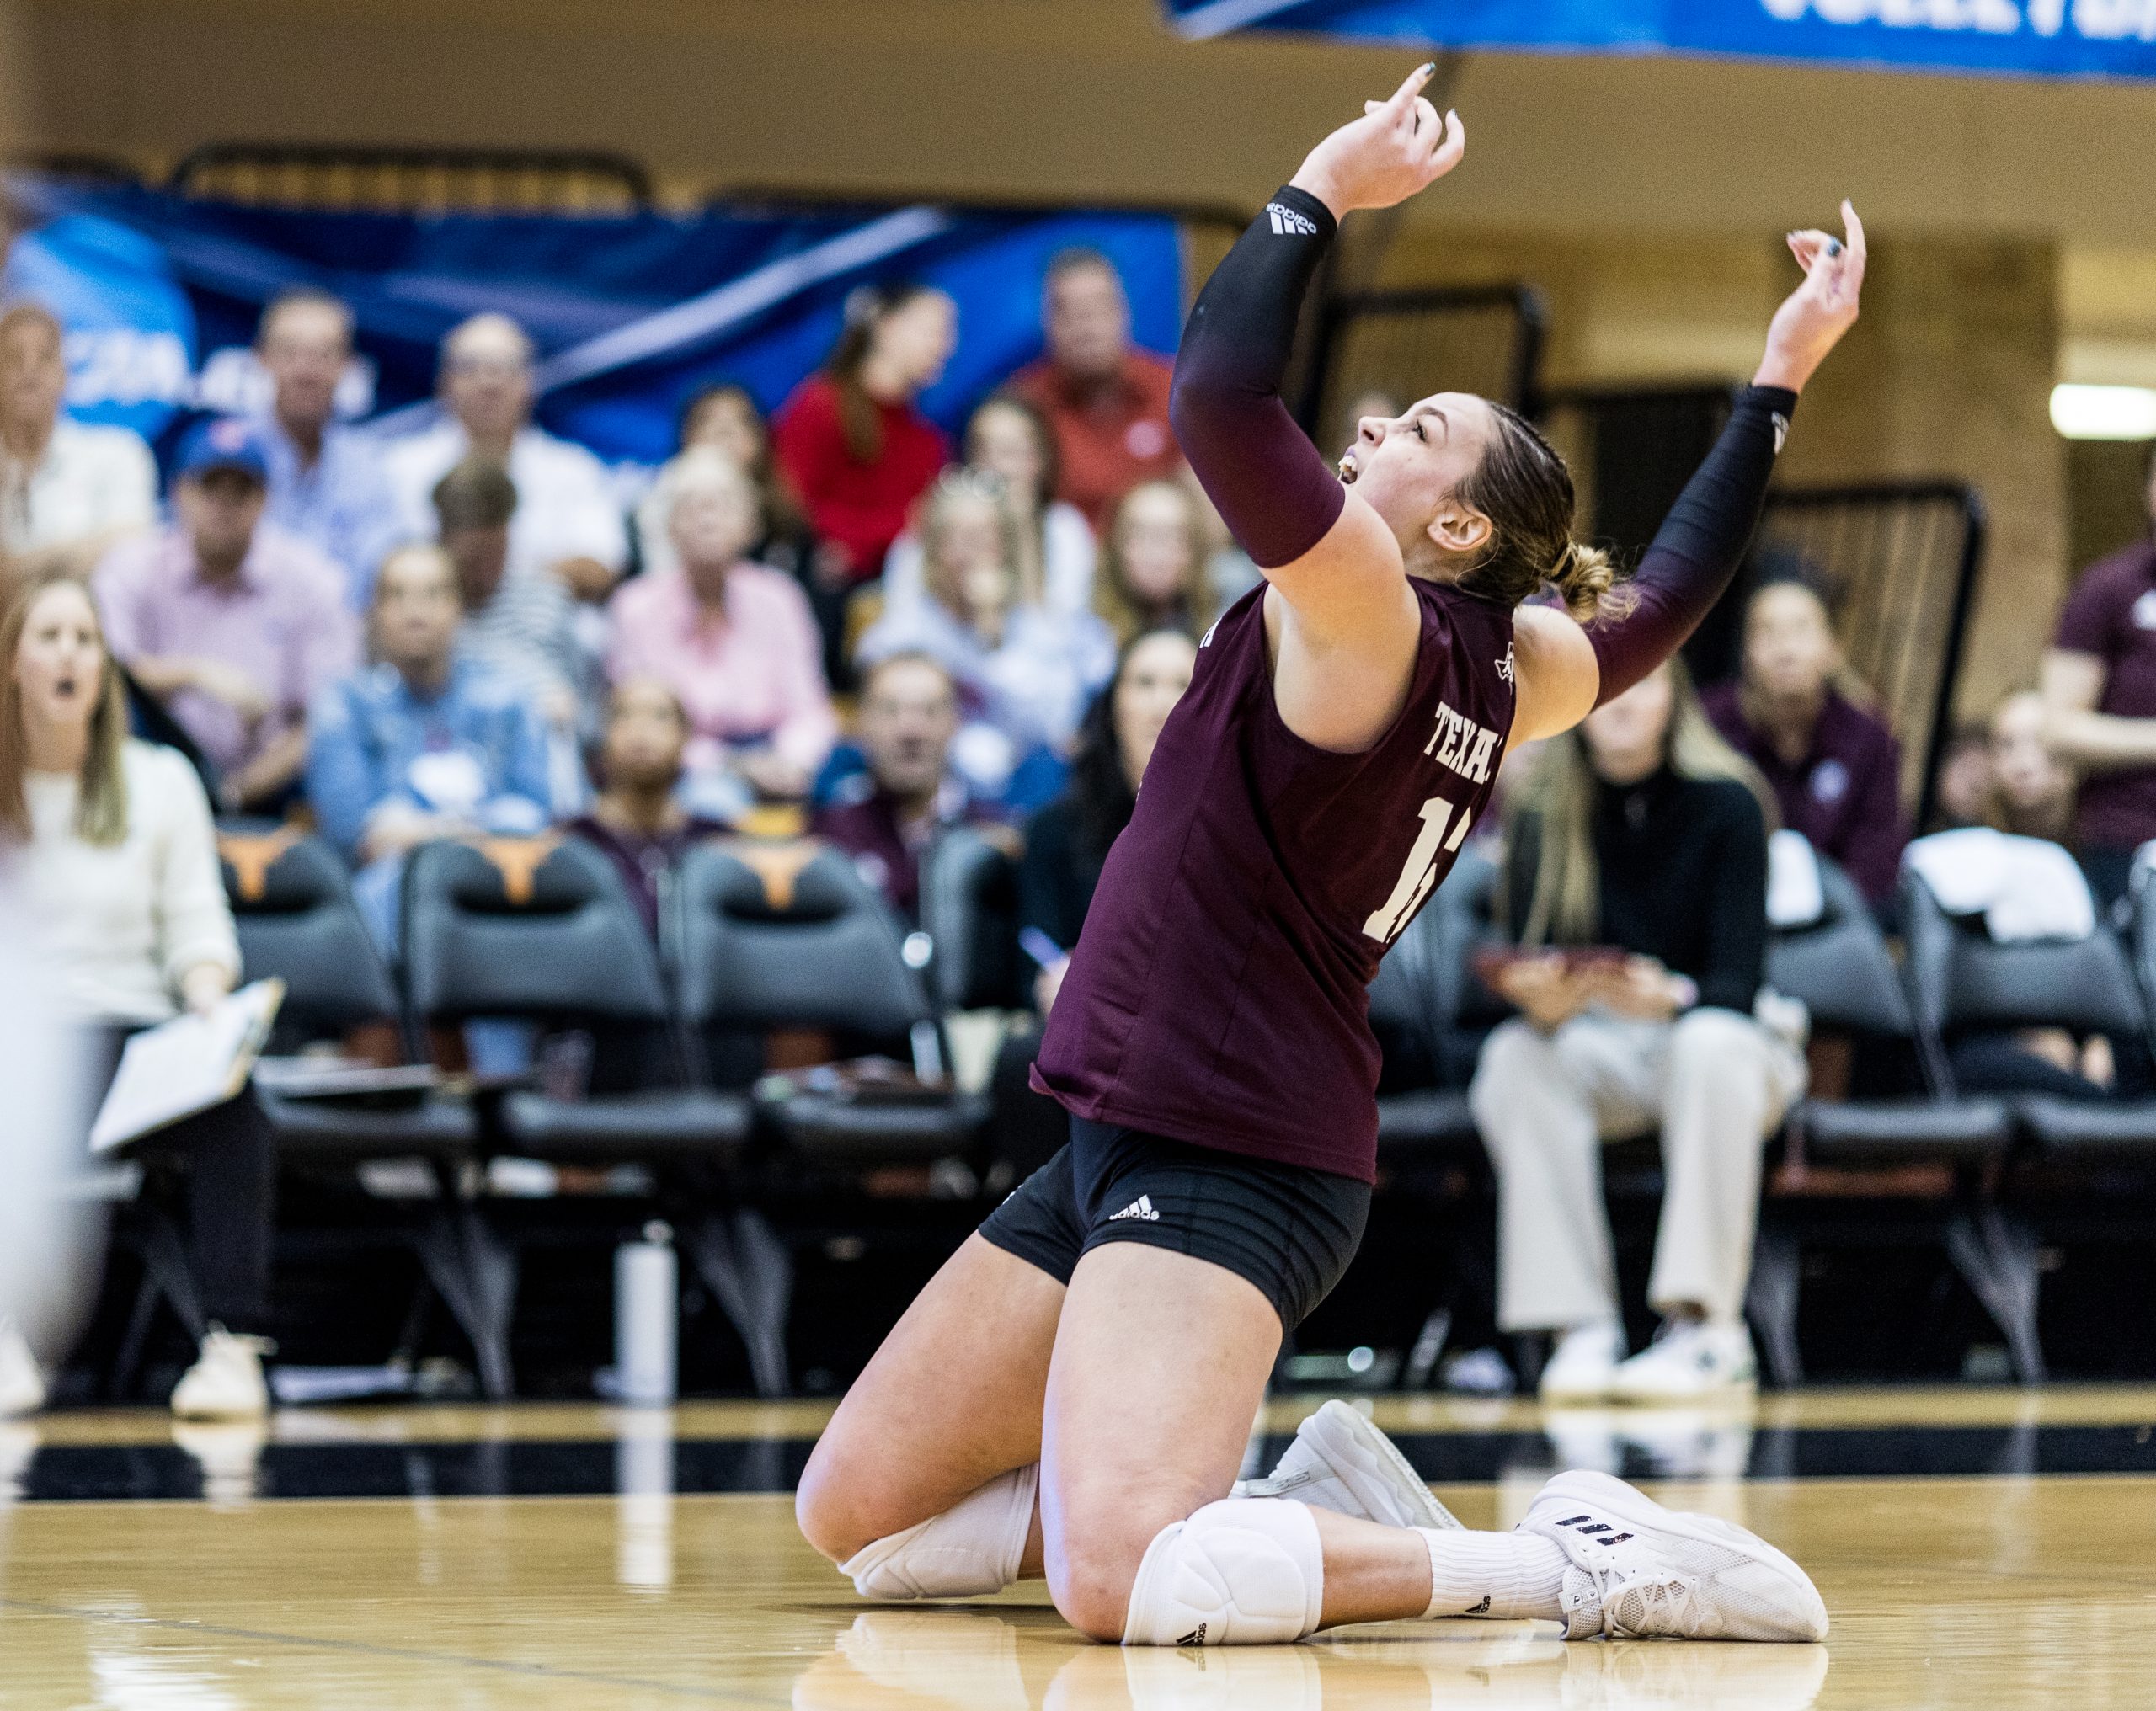 GALLERY%3A+Volleyball+vs.+Texas